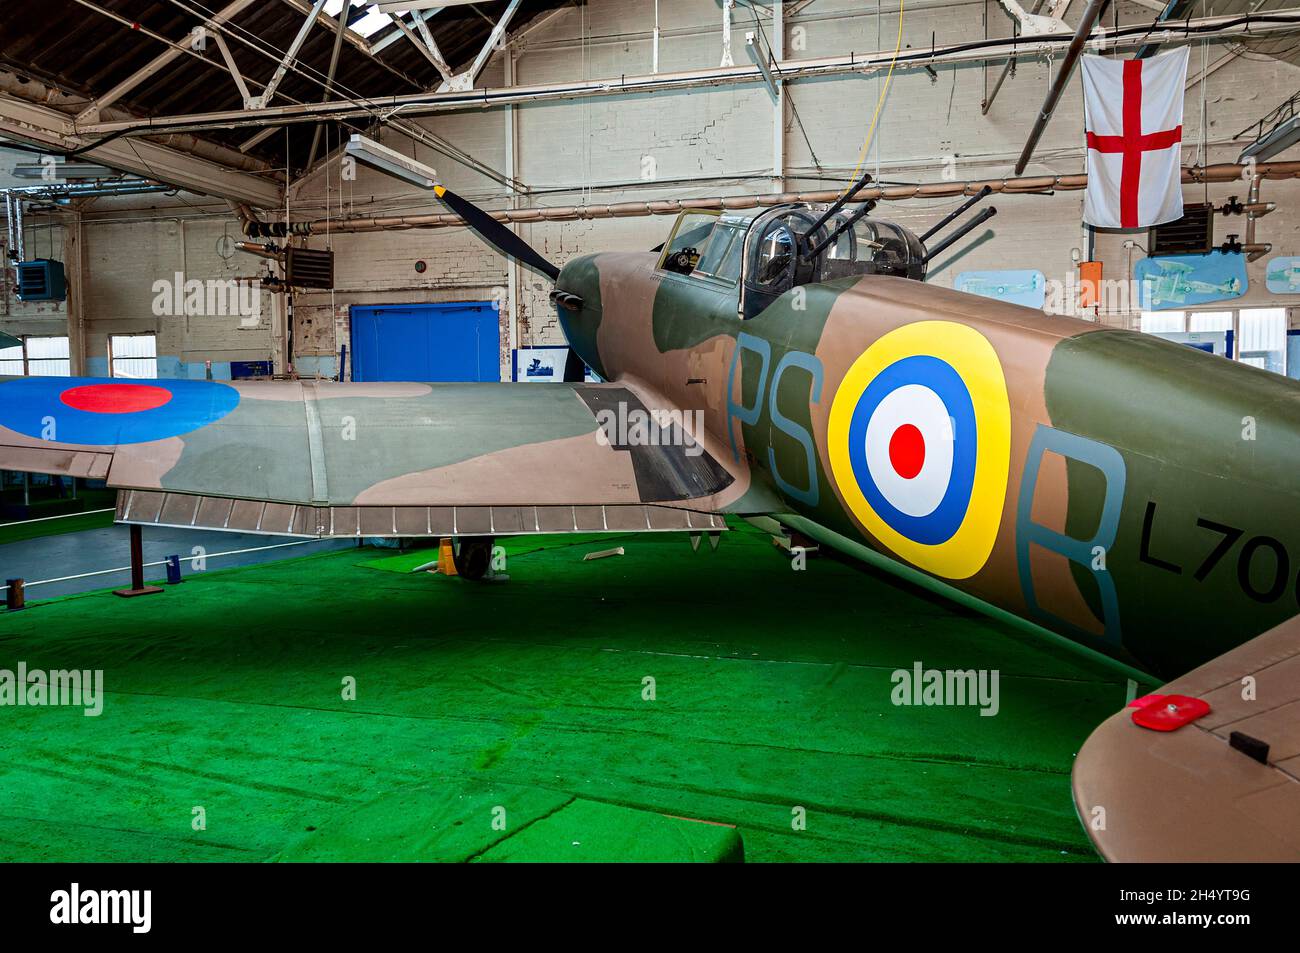 A replica of the Boulton Paul Defiant which was a British interceptor aircraft that served as a turret fighter with the Royal Air Force in WW2 Stock Photo